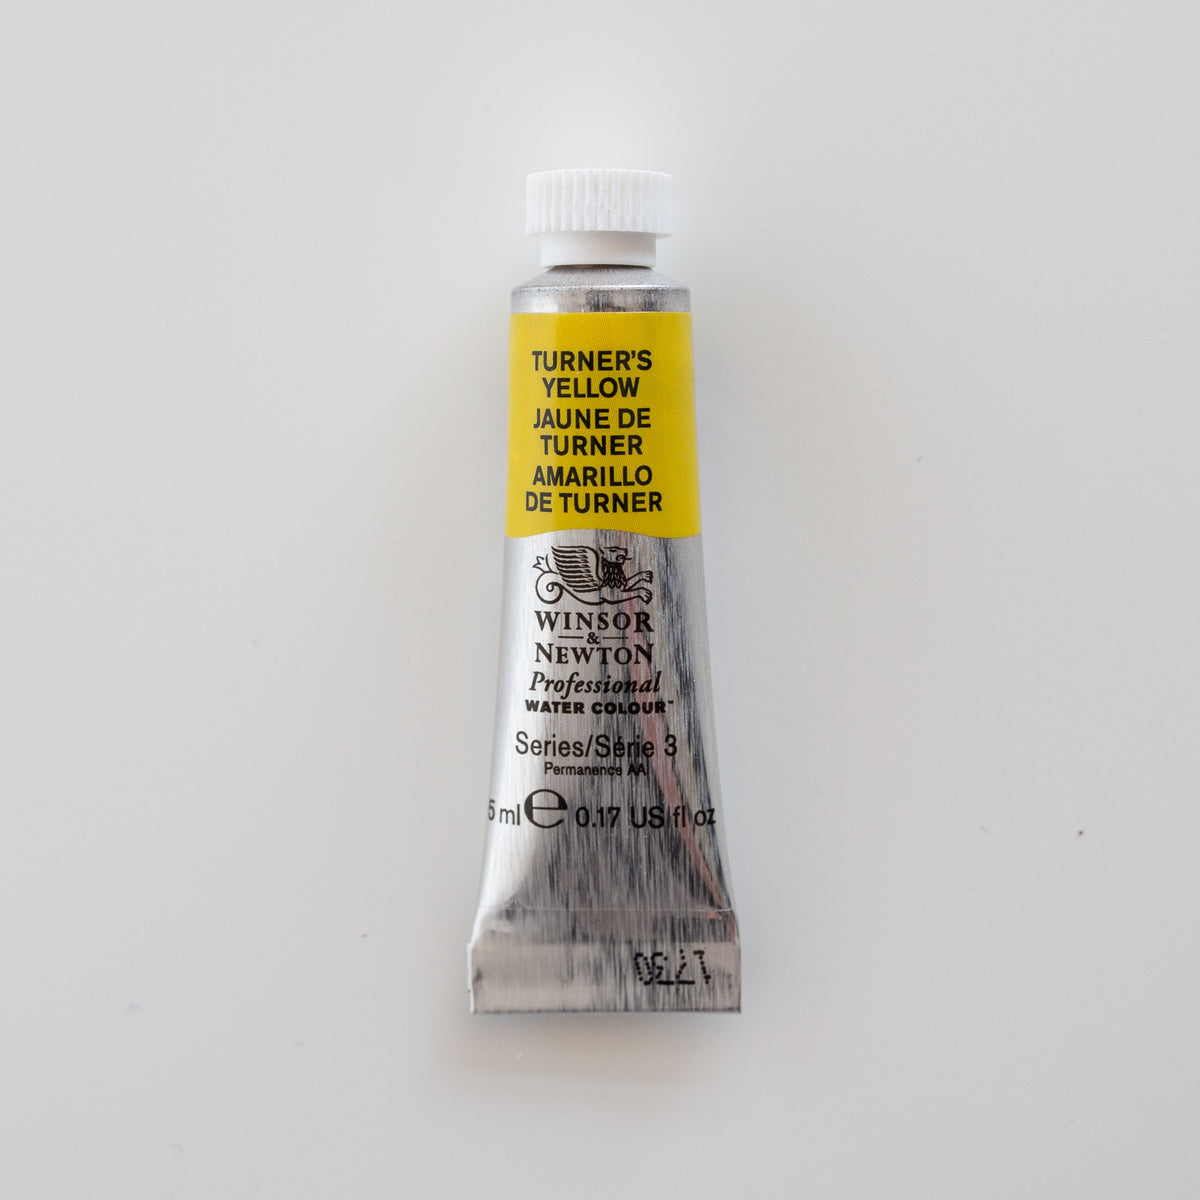 Winsor & Newton Professional Water Colours 5ml Turner's Yellow 3